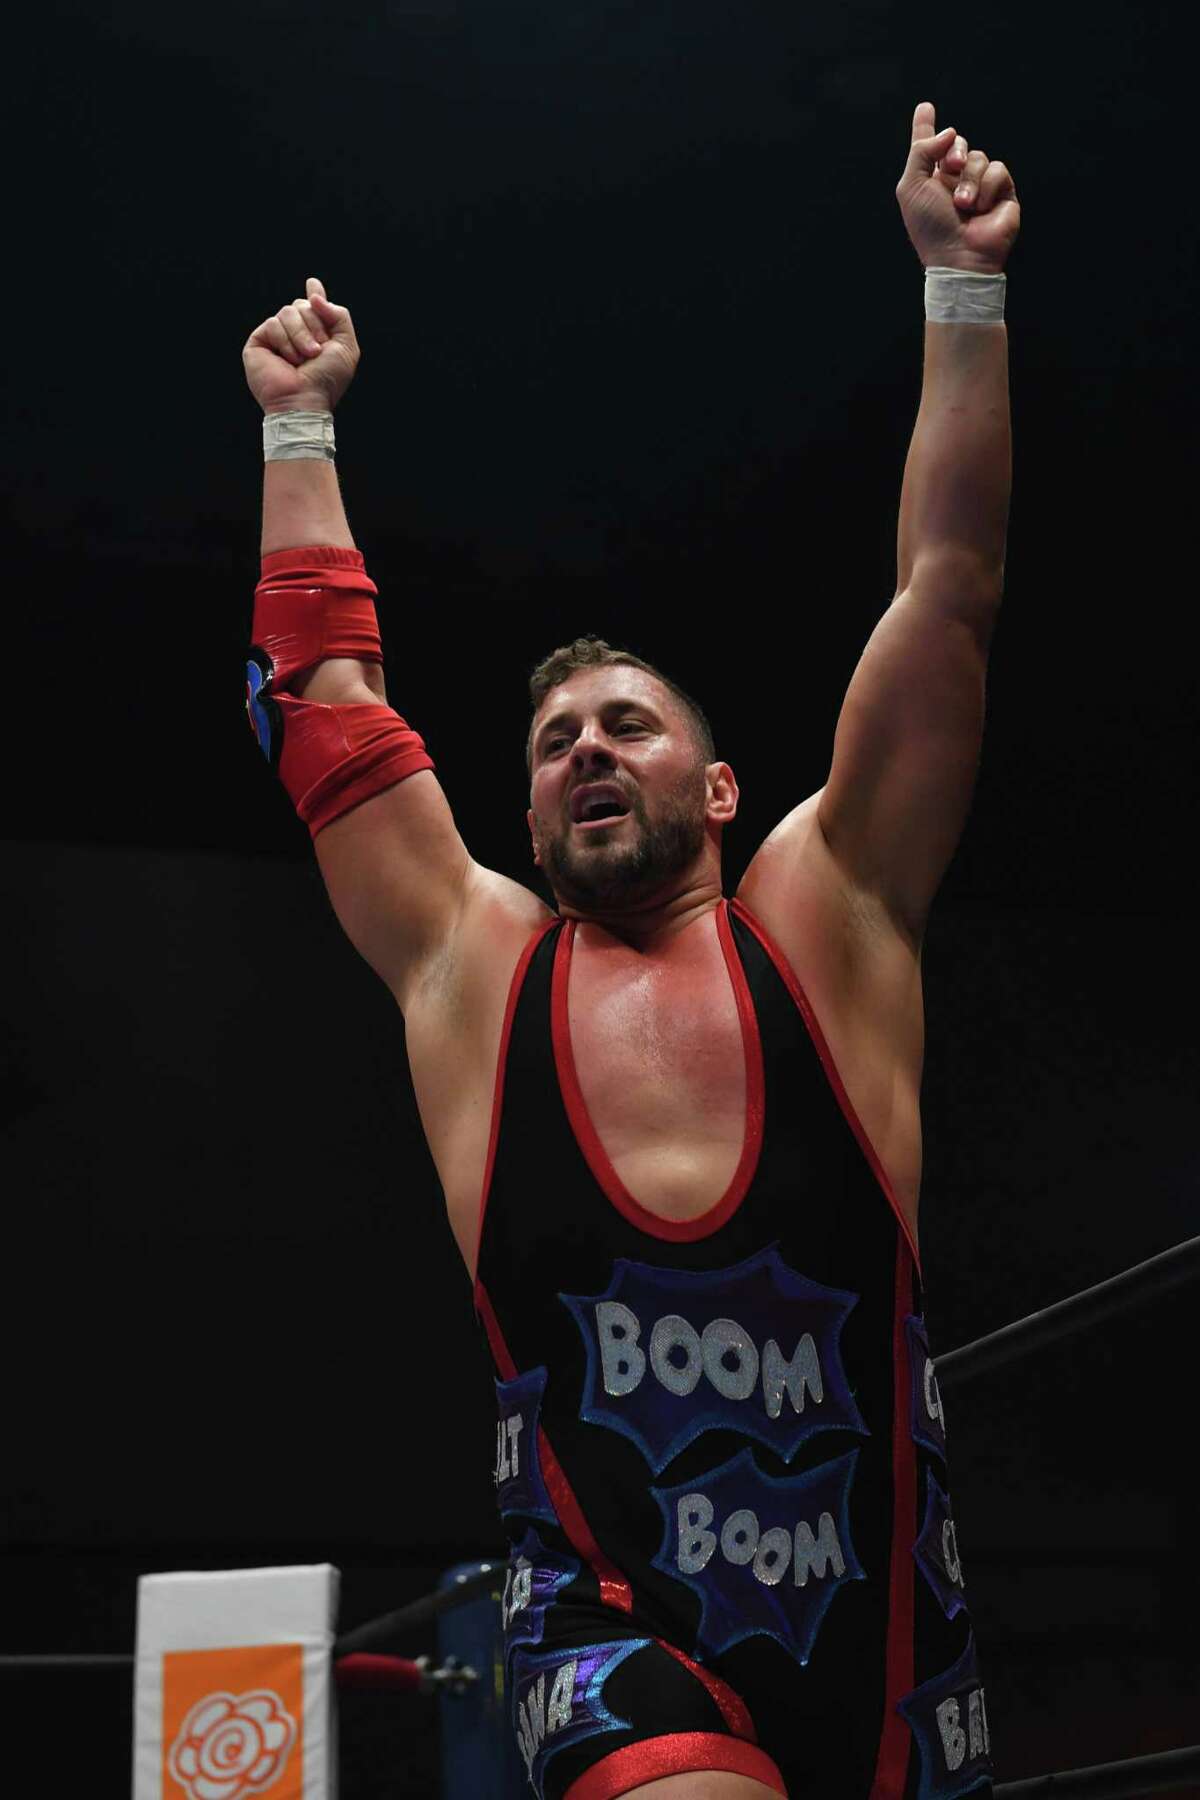 Colt Cabana enters the ring during the New Japan Cup of NJPW at Aore Nagaoka on March 24 in Nagaoka, Japan.